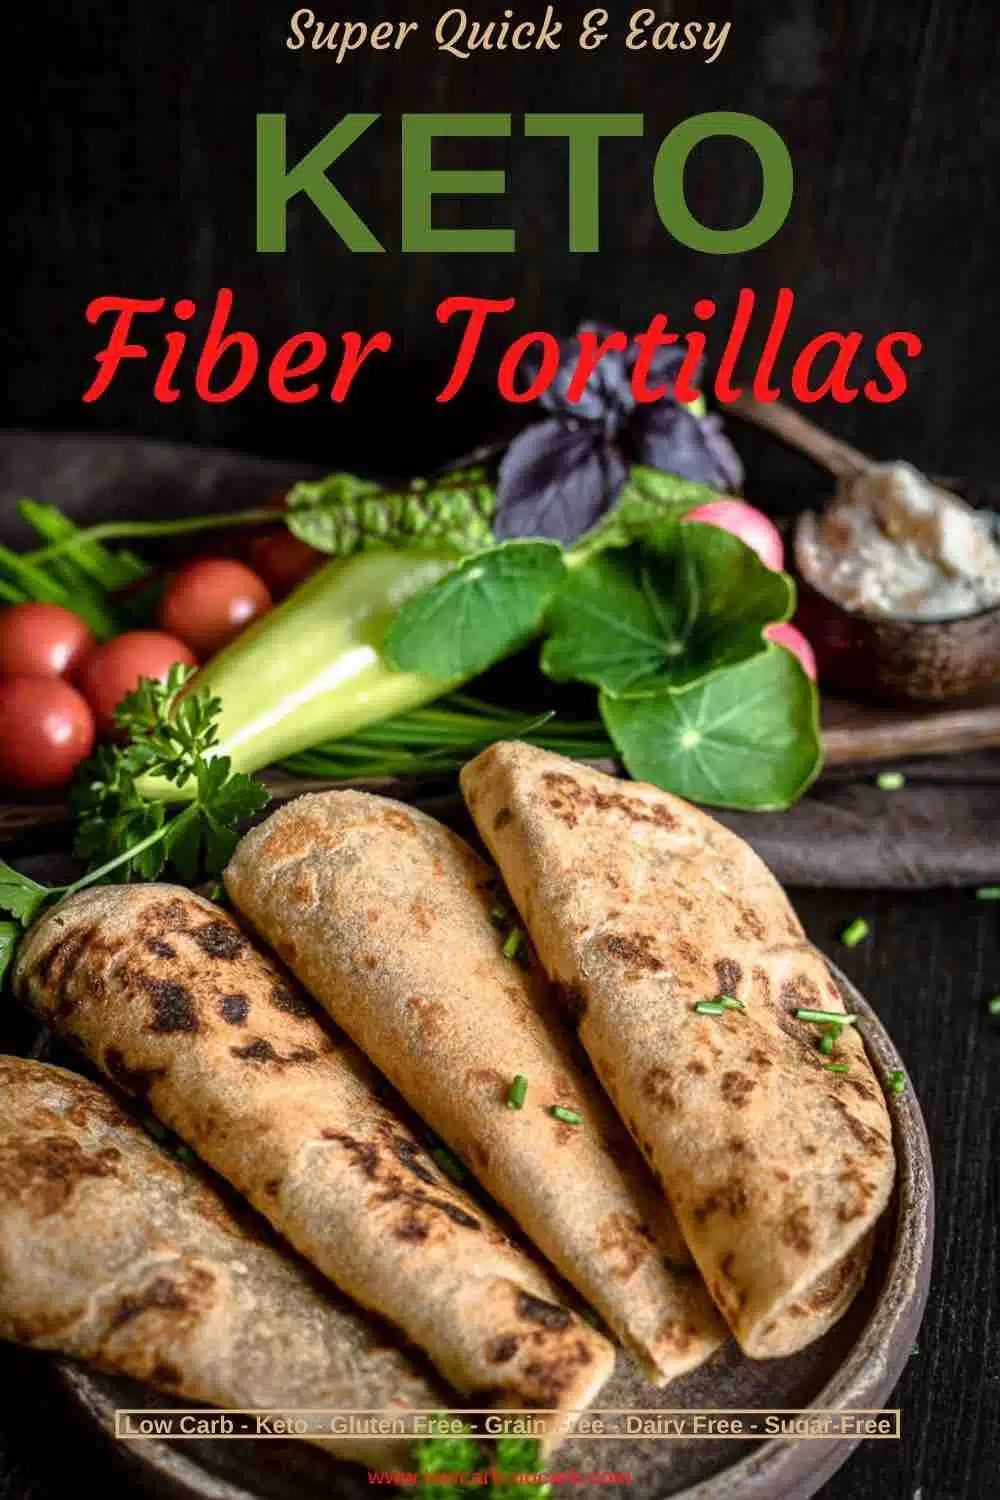 Rustic looking Tortilla filled with Fiber